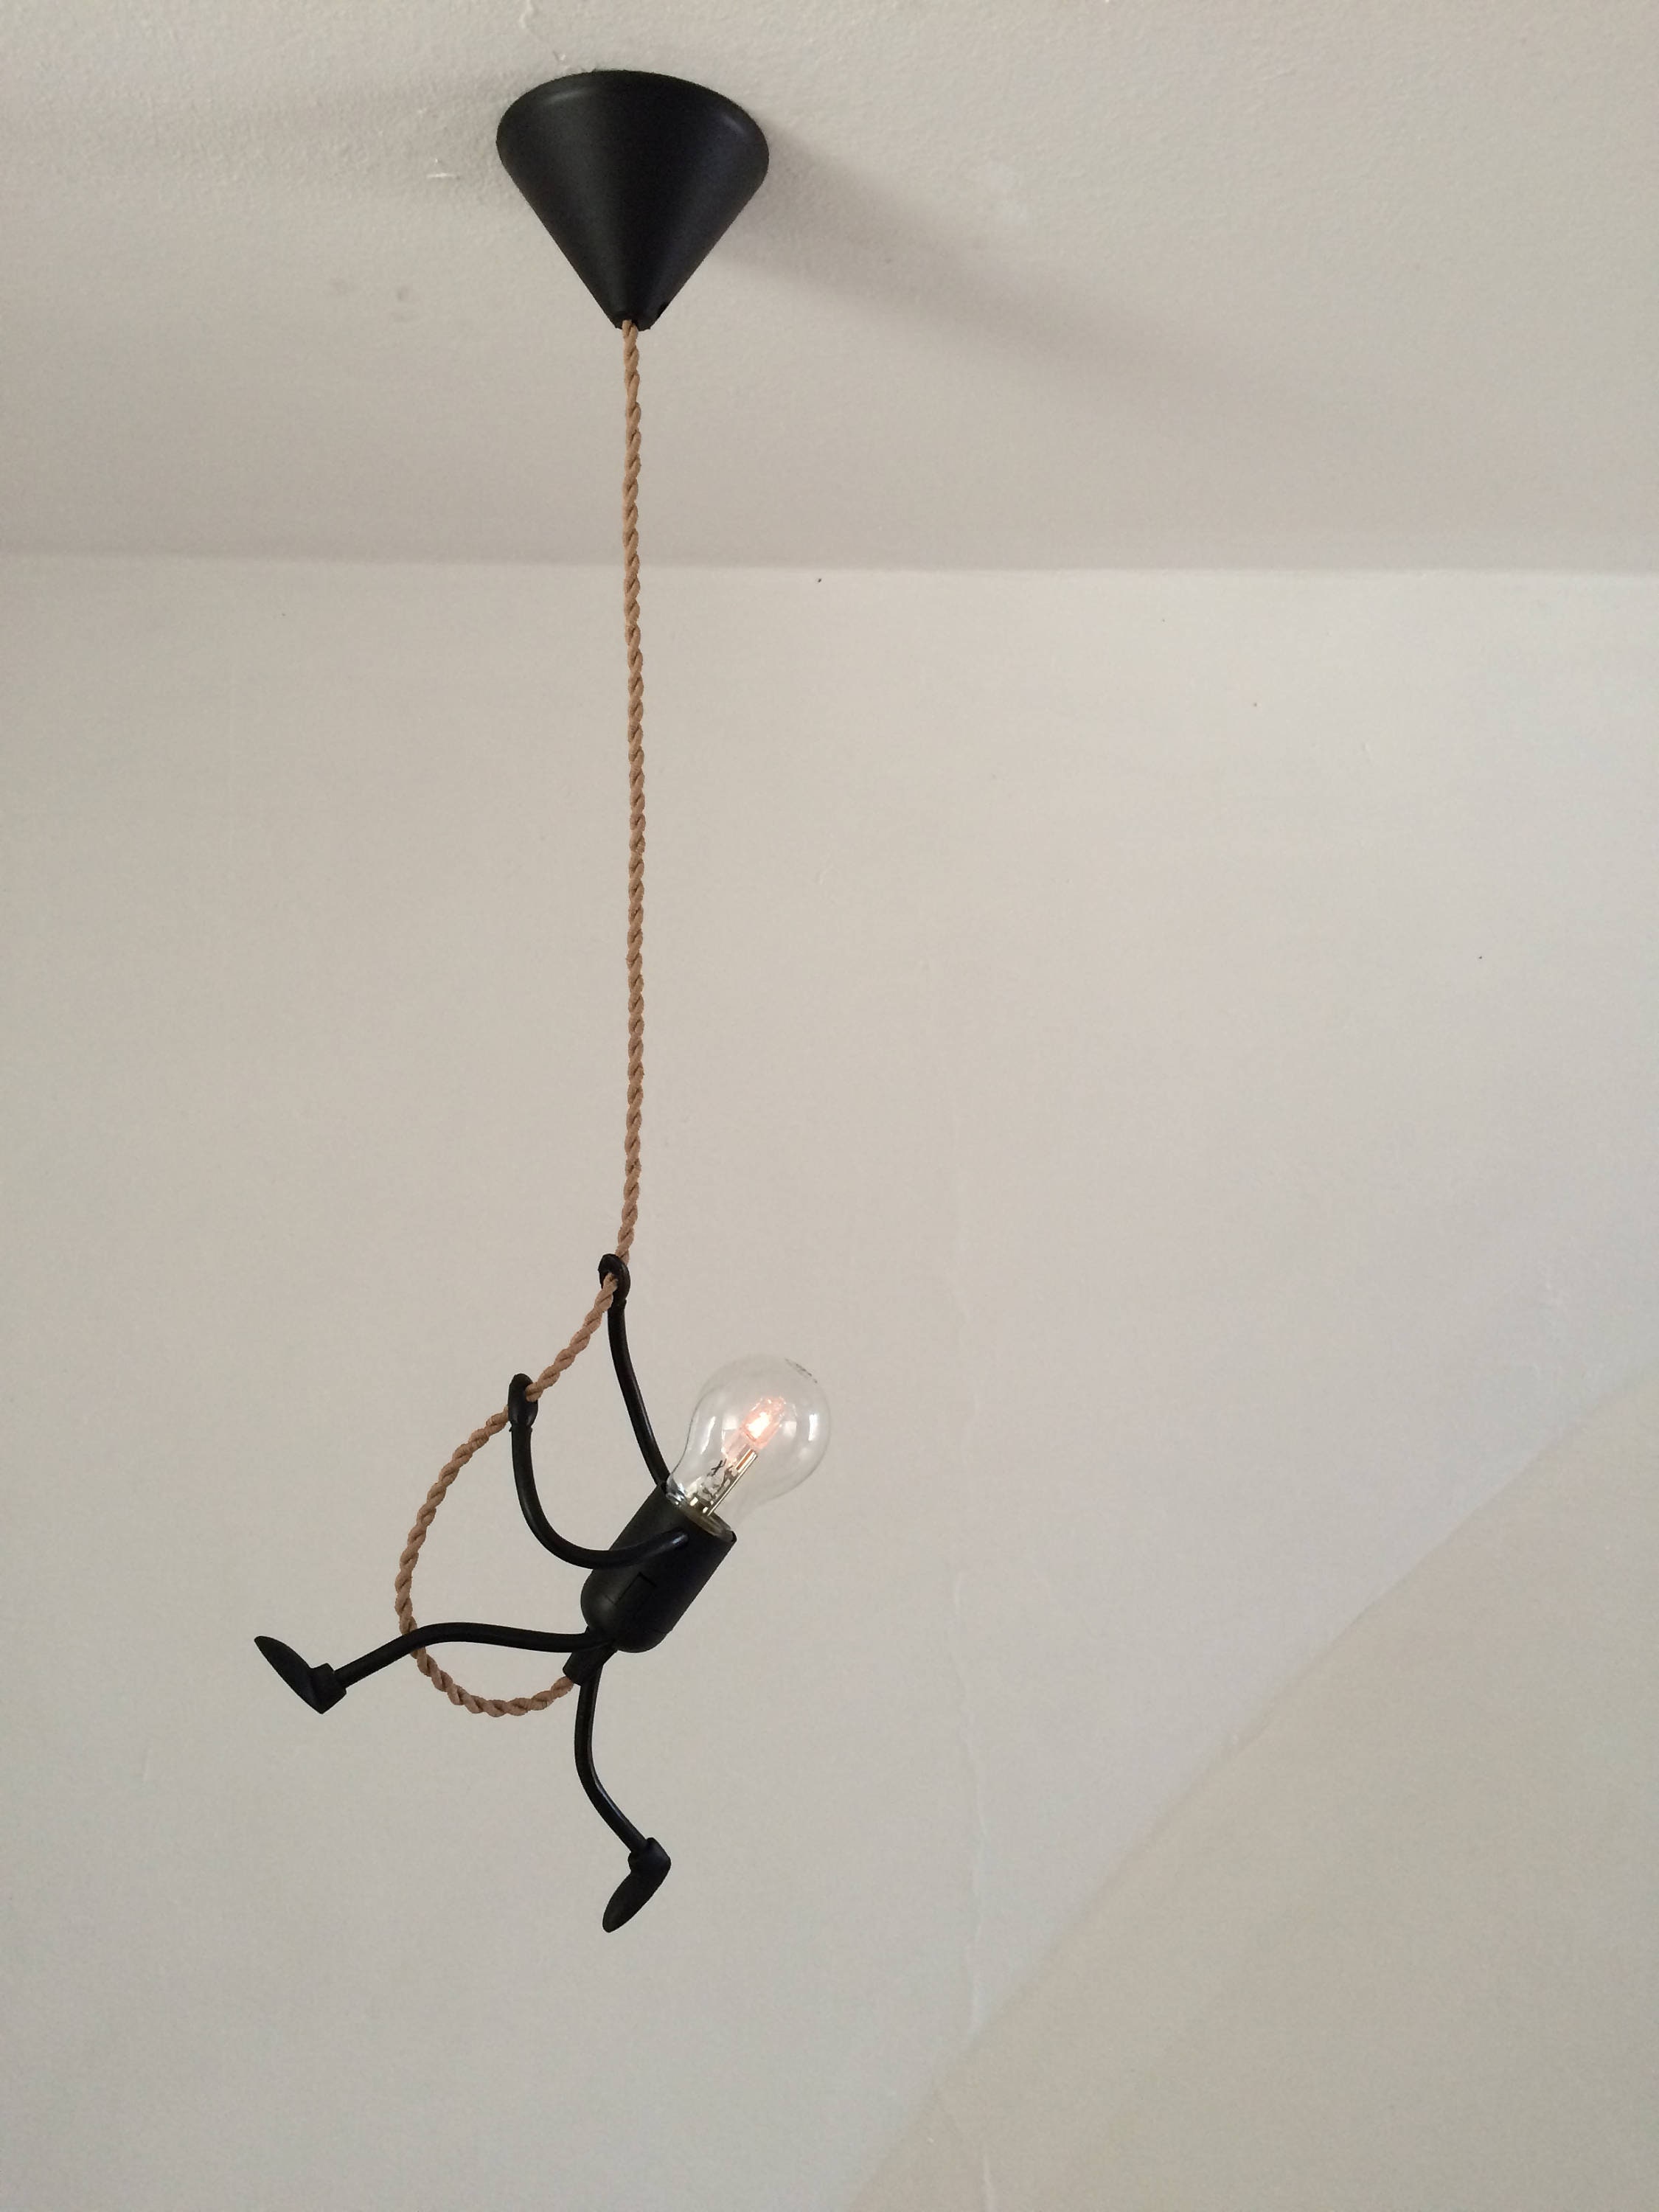 Mr.bright THE ORIGINAL LIGHT. Playful Pendant Light. Unique, Fun and  Versatile This 27 Cm Tall Lively Rope Climber is a Great Eyecatcher. 